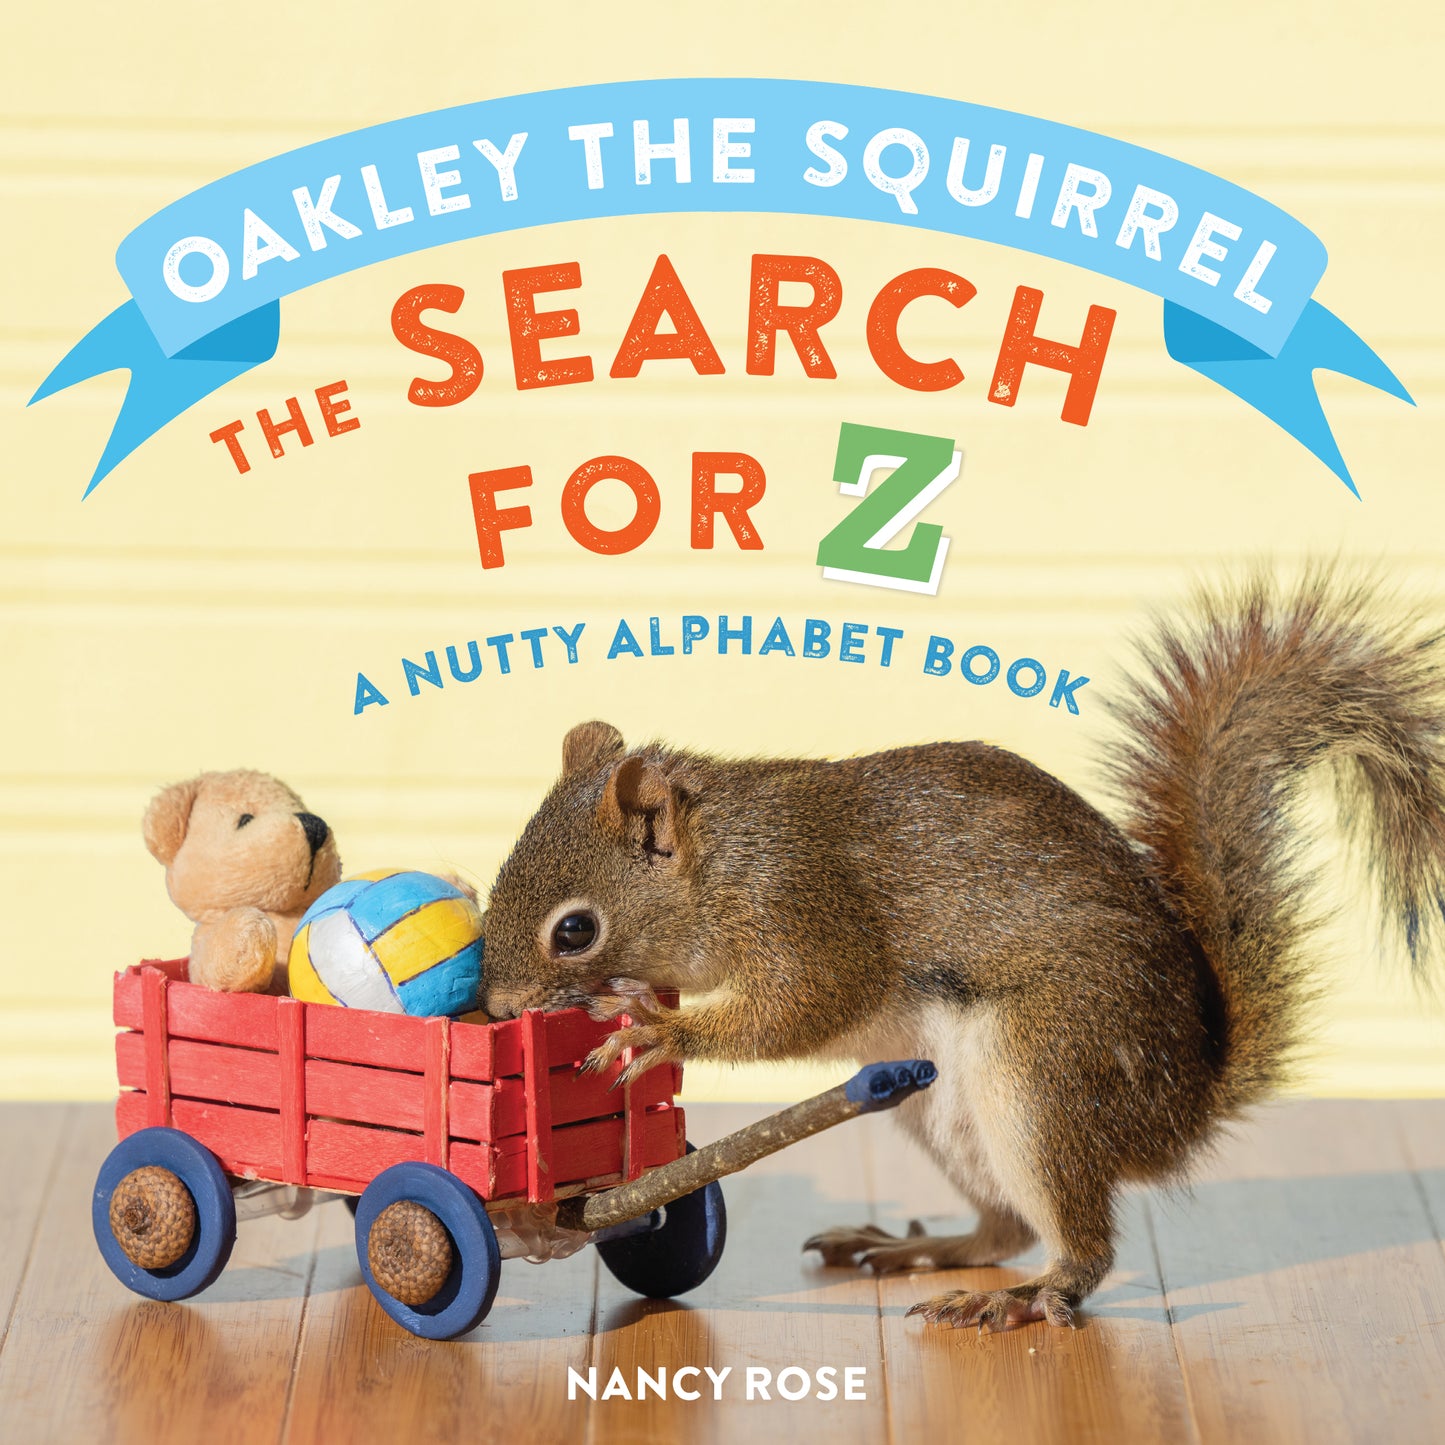 Oakley the Squirrel: The Search for Z: A Nutty Alphabet Book by Nancy Rose